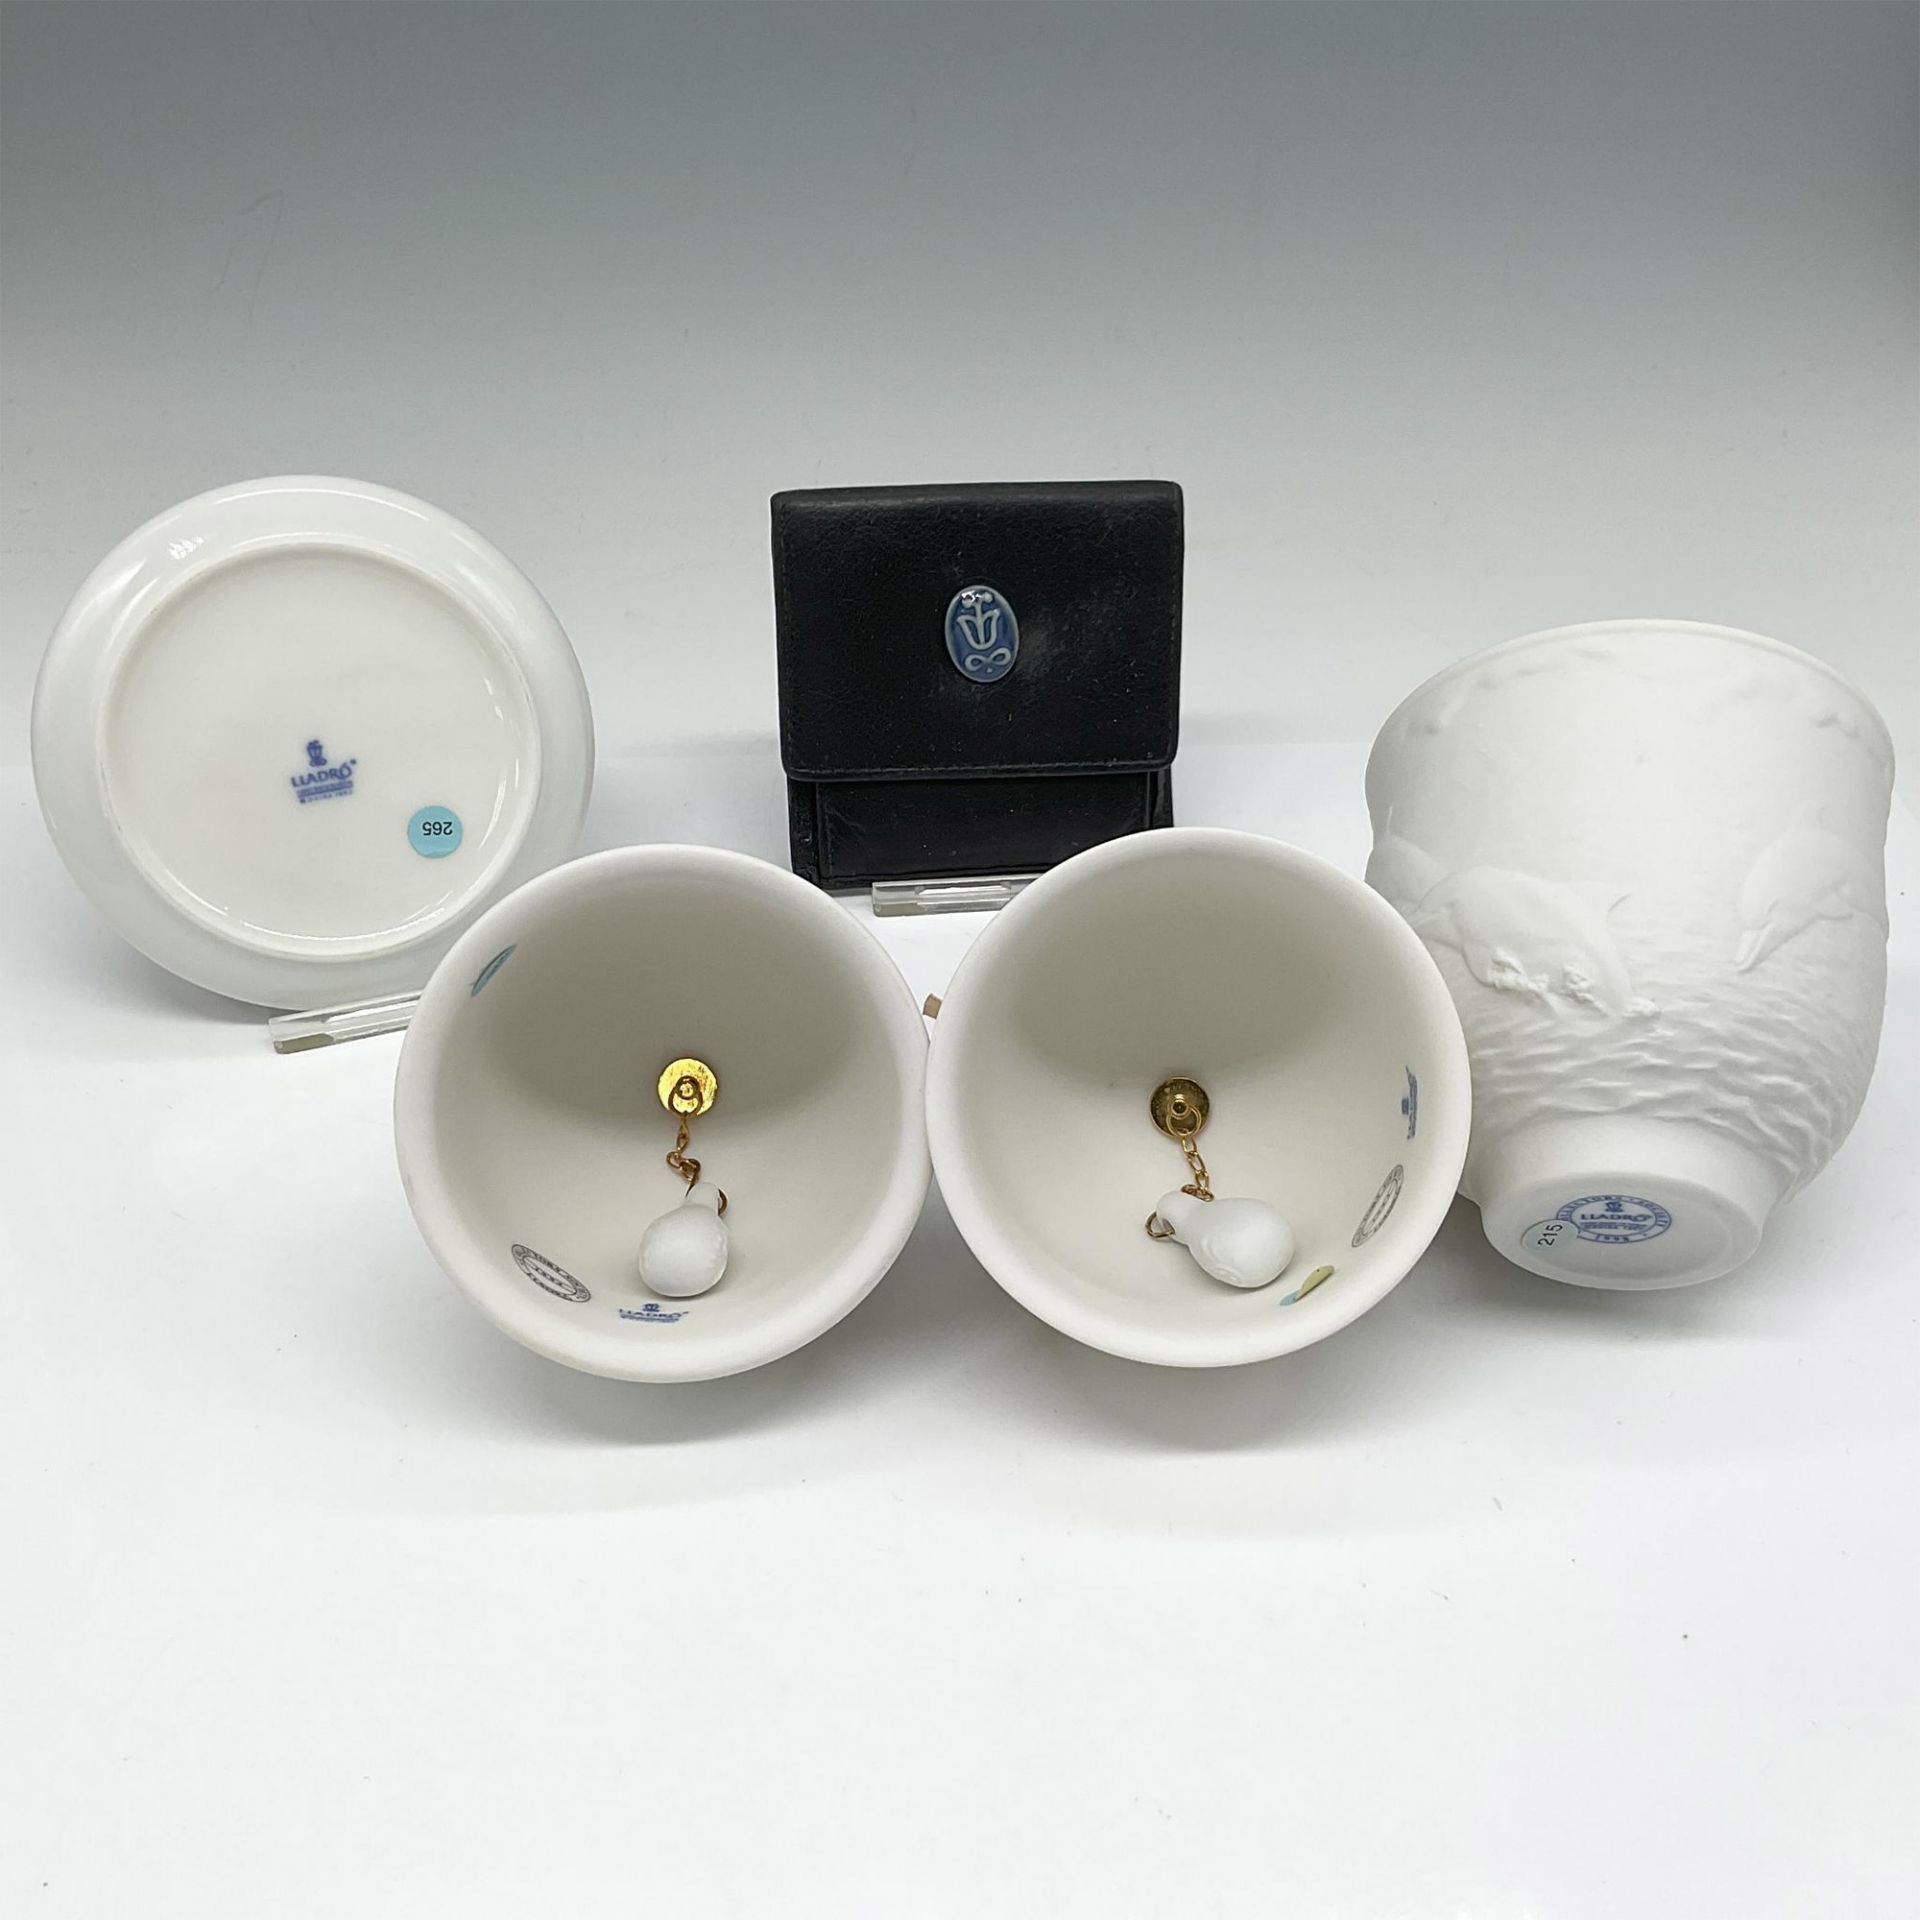 5pc Lladro CS Bells, Dolphins Cup, Duck Plate & Coin Purse - Image 3 of 4